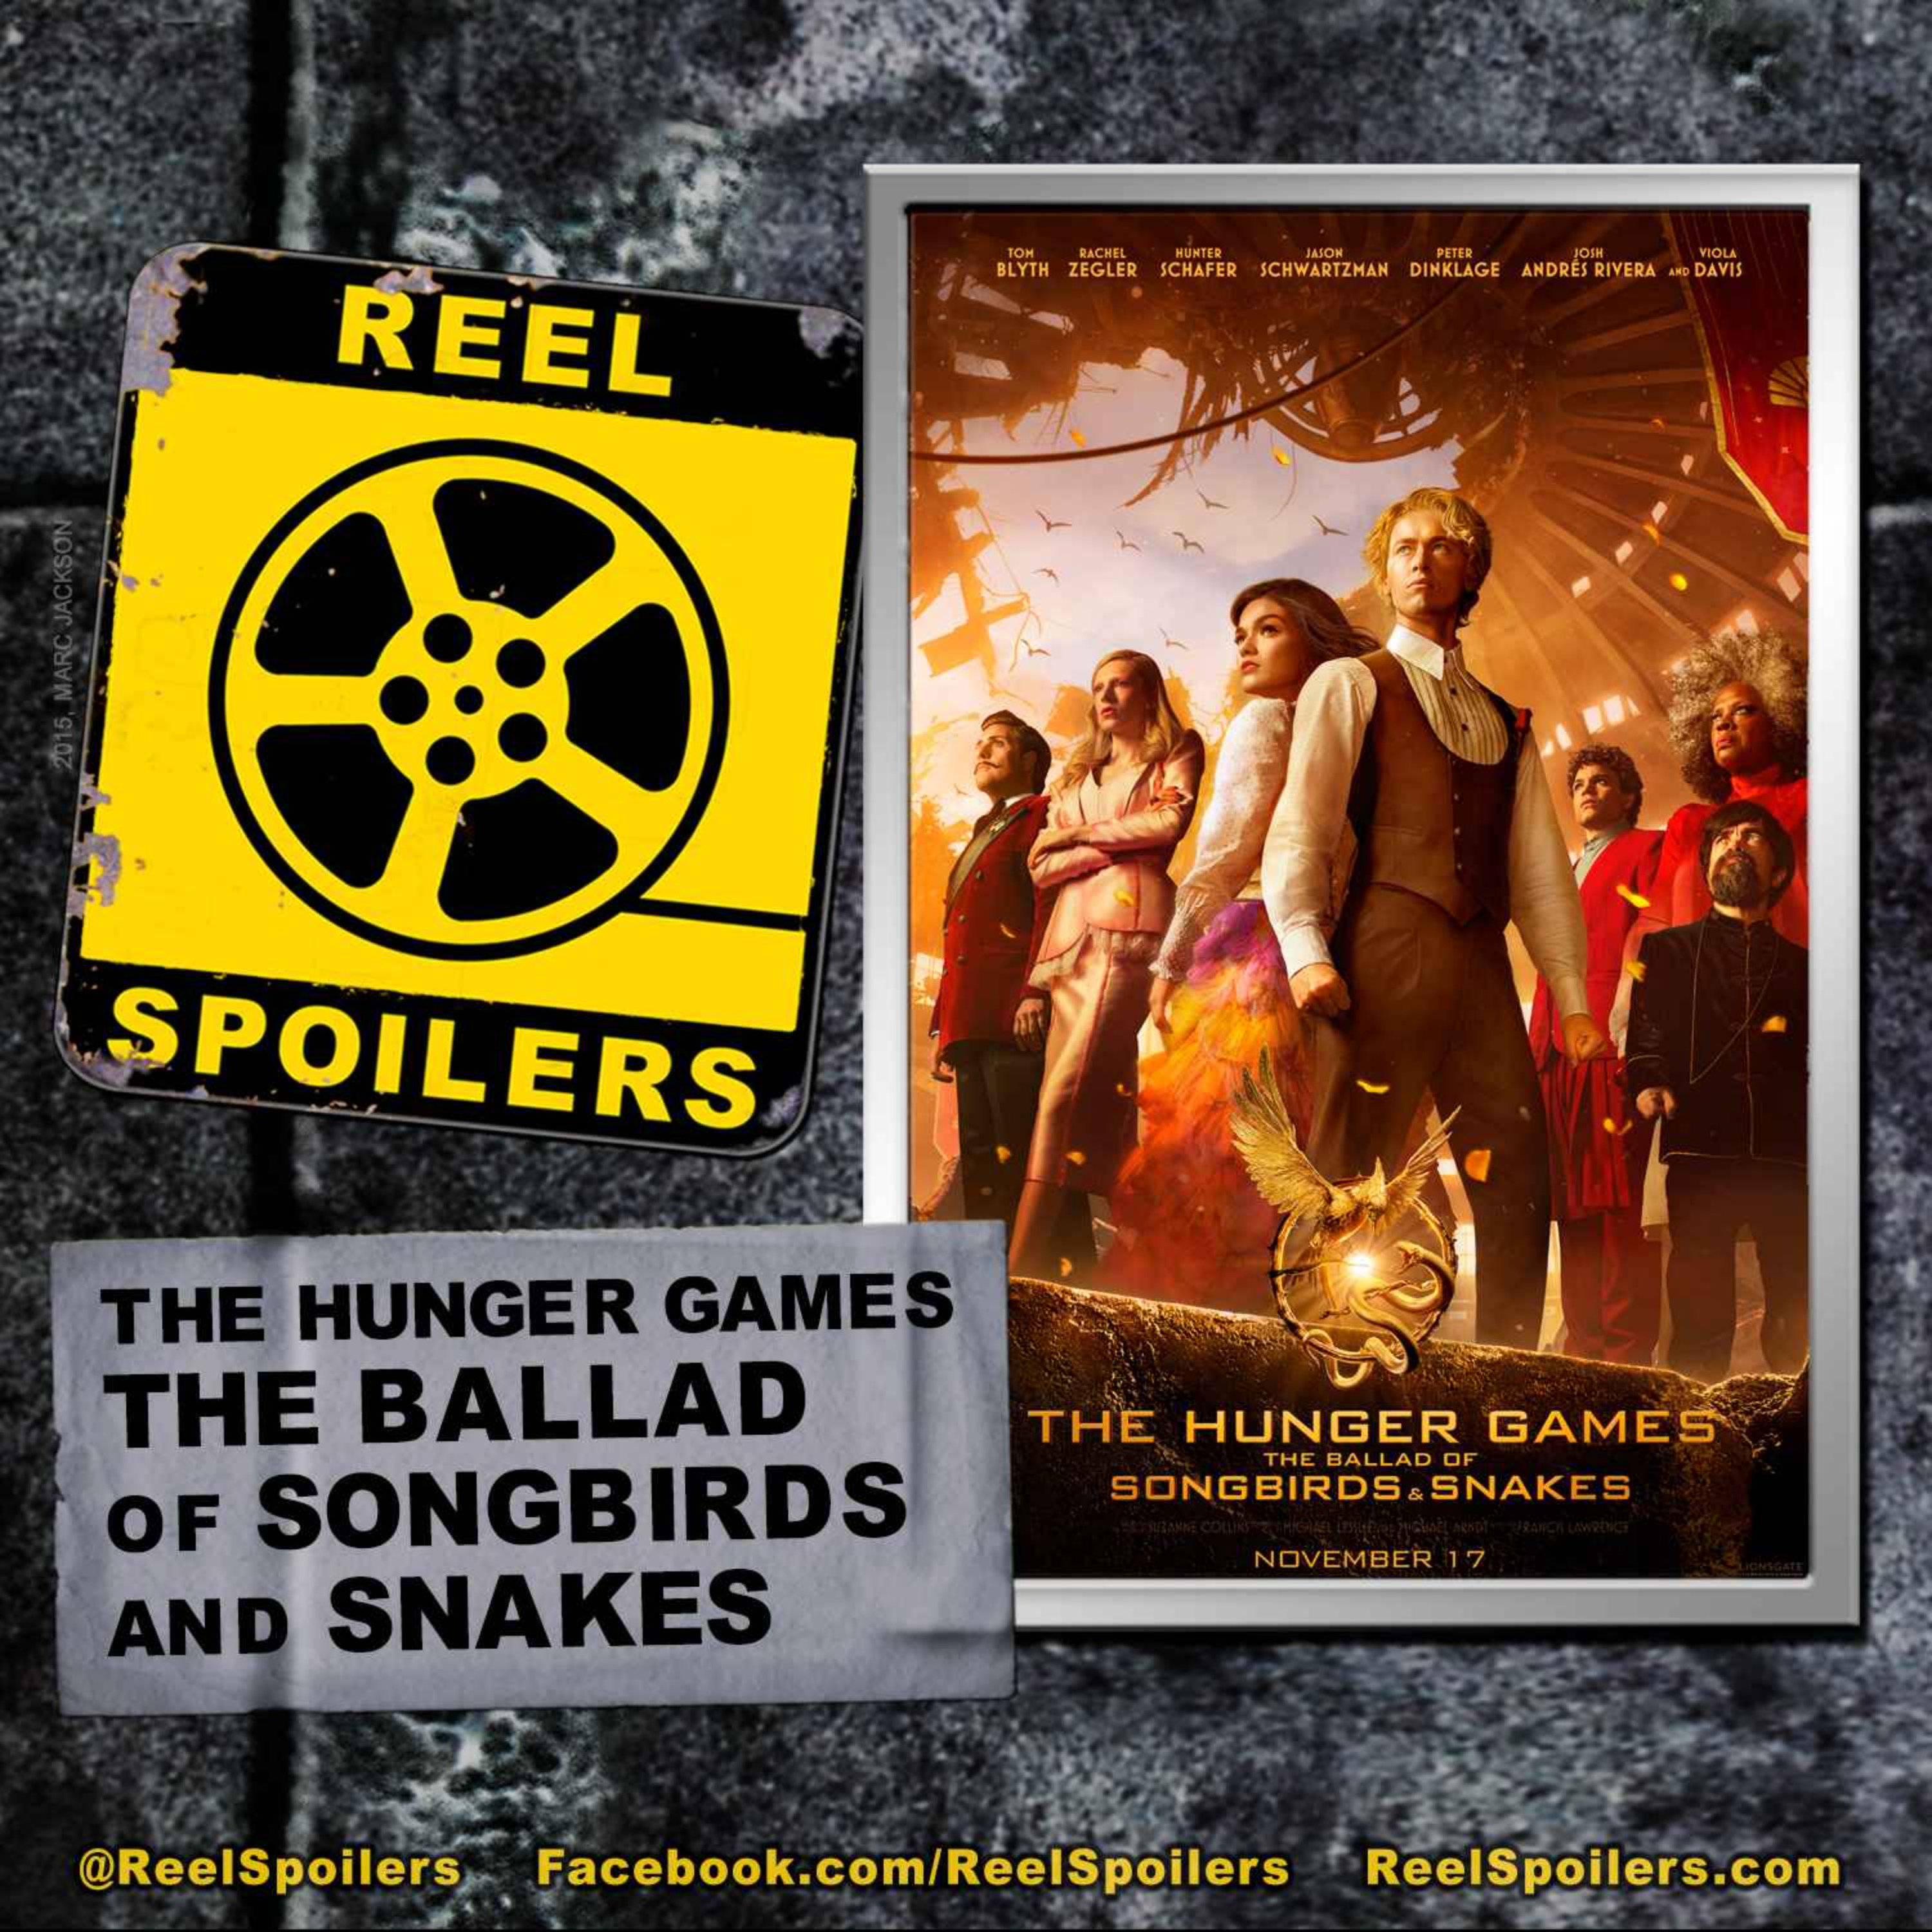 THE HUNGER GAMES: THE BALLAD OF SONGBIRDS AND SNAKES